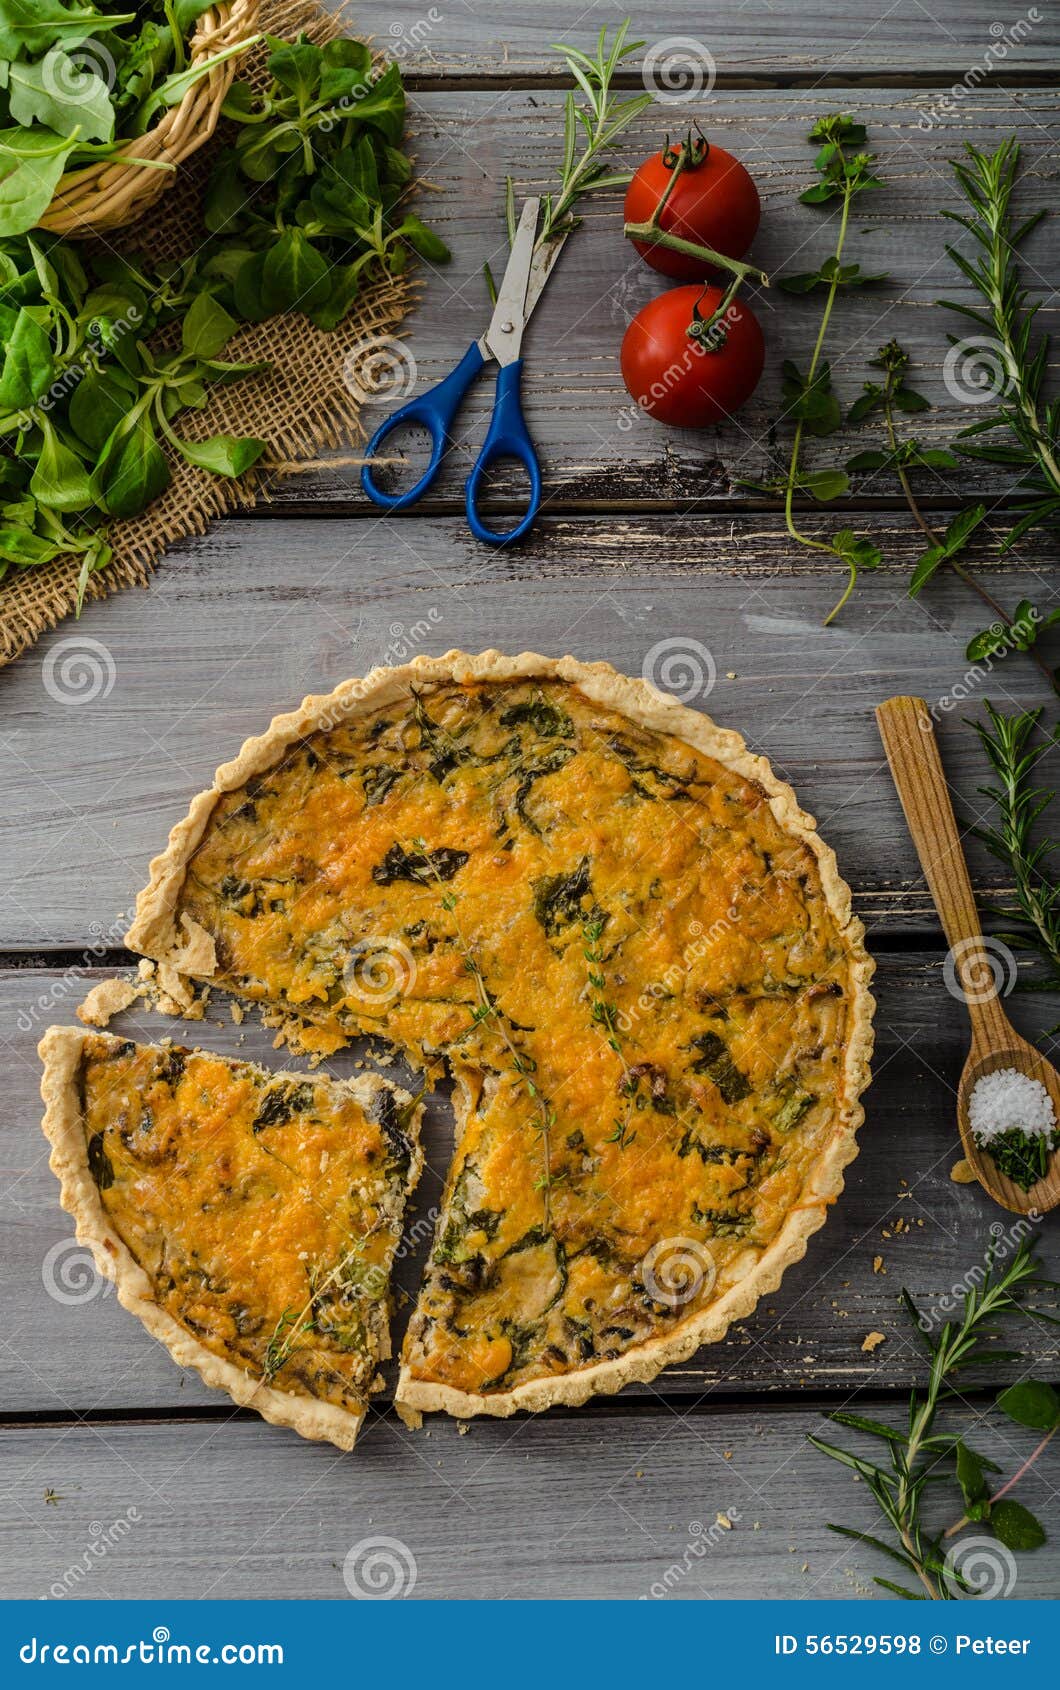 Domestic rustic quiche stock photo. Image of cooking - 56529598